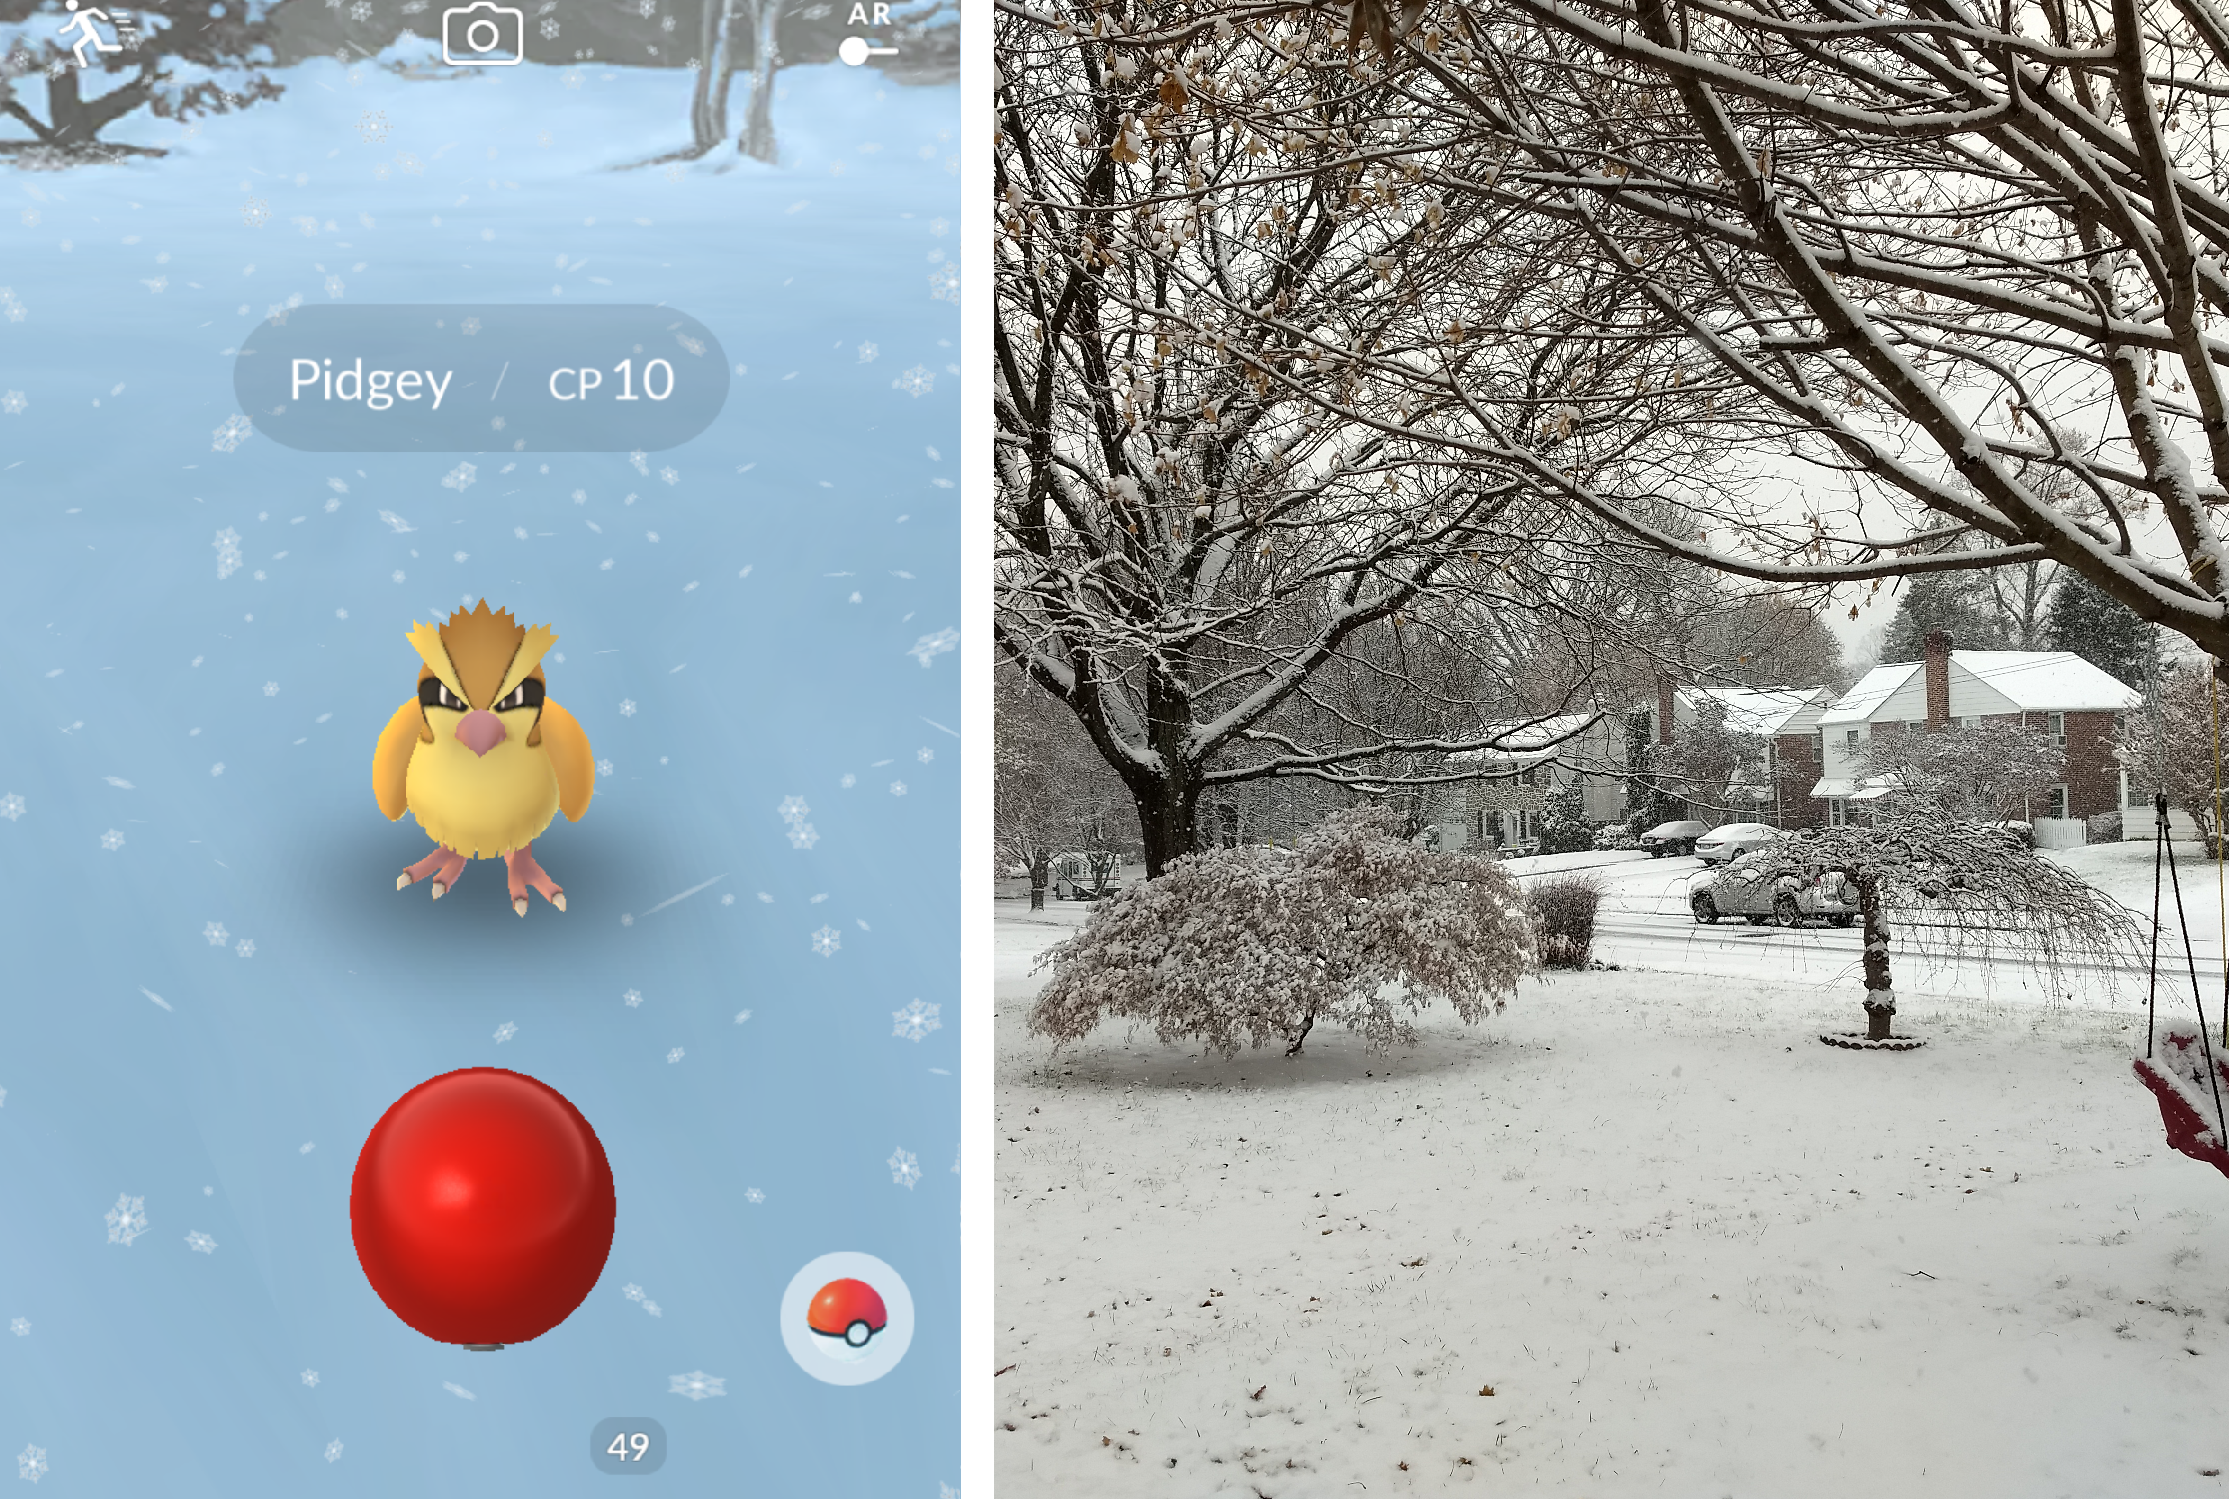 Some Pokemon GO Players Are Getting Hit With Overly Cautious ‘Extreme’ Weather Warnings 